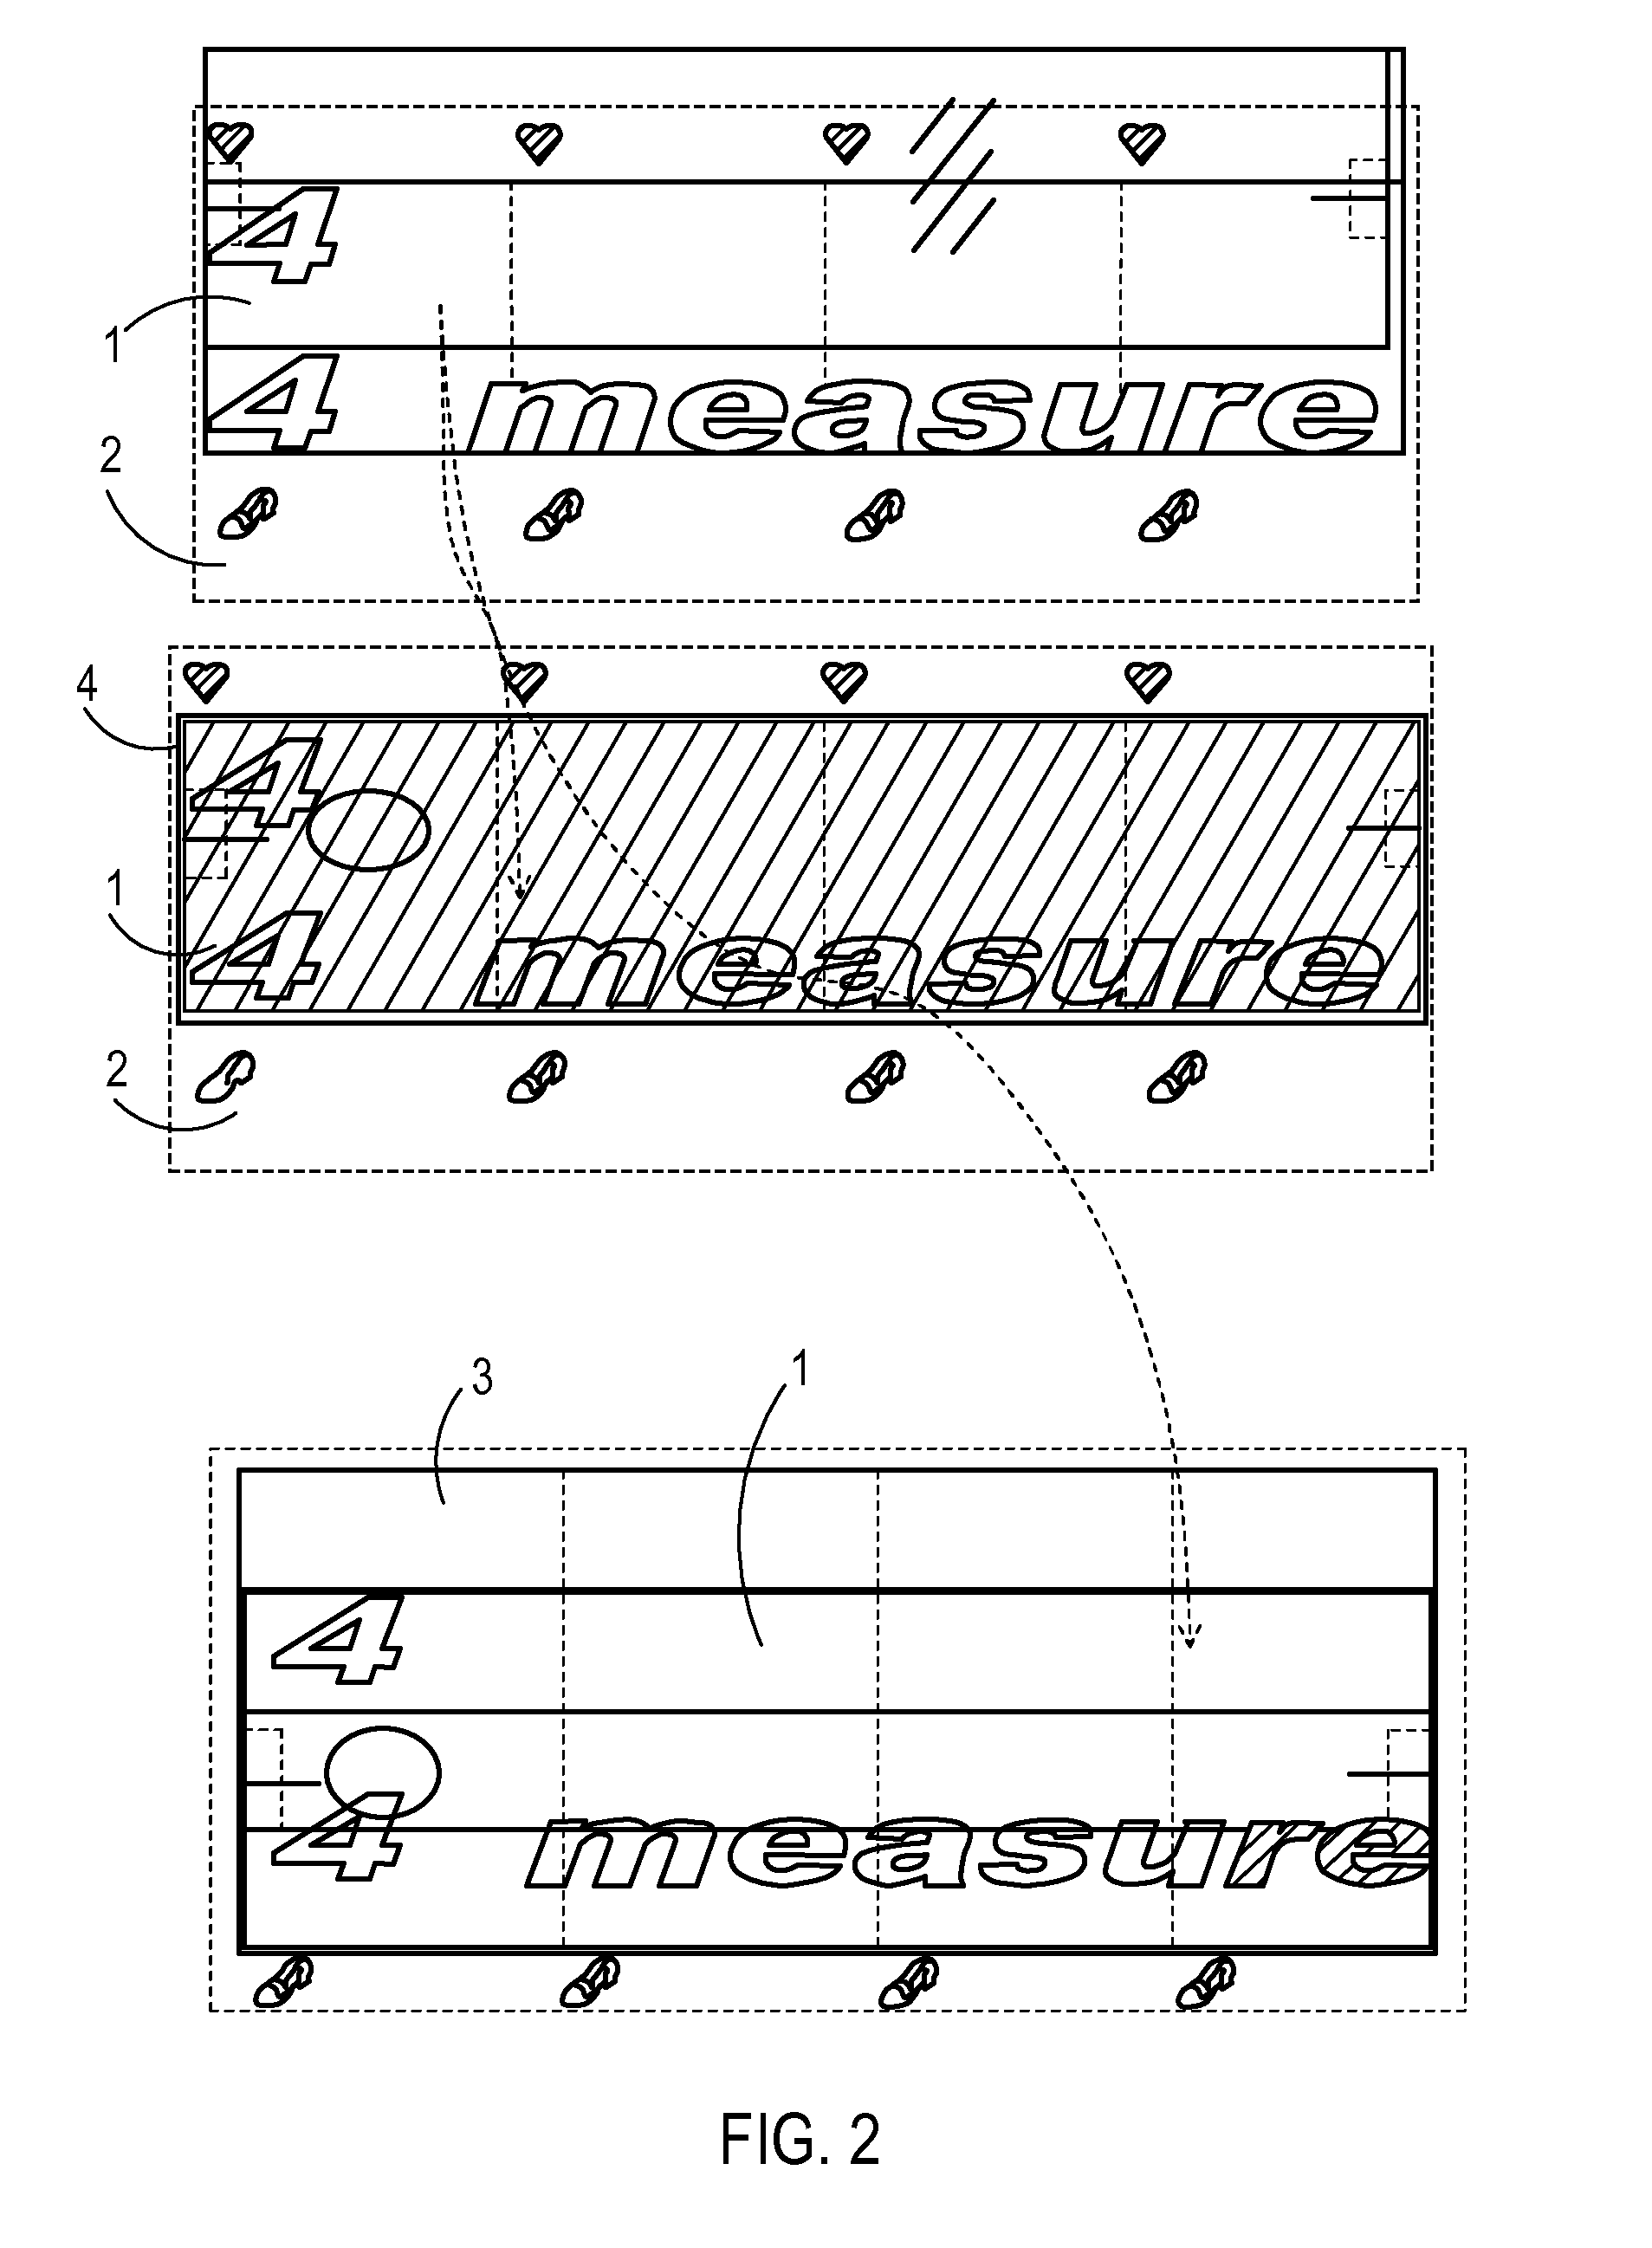 System to teach music notation and composition